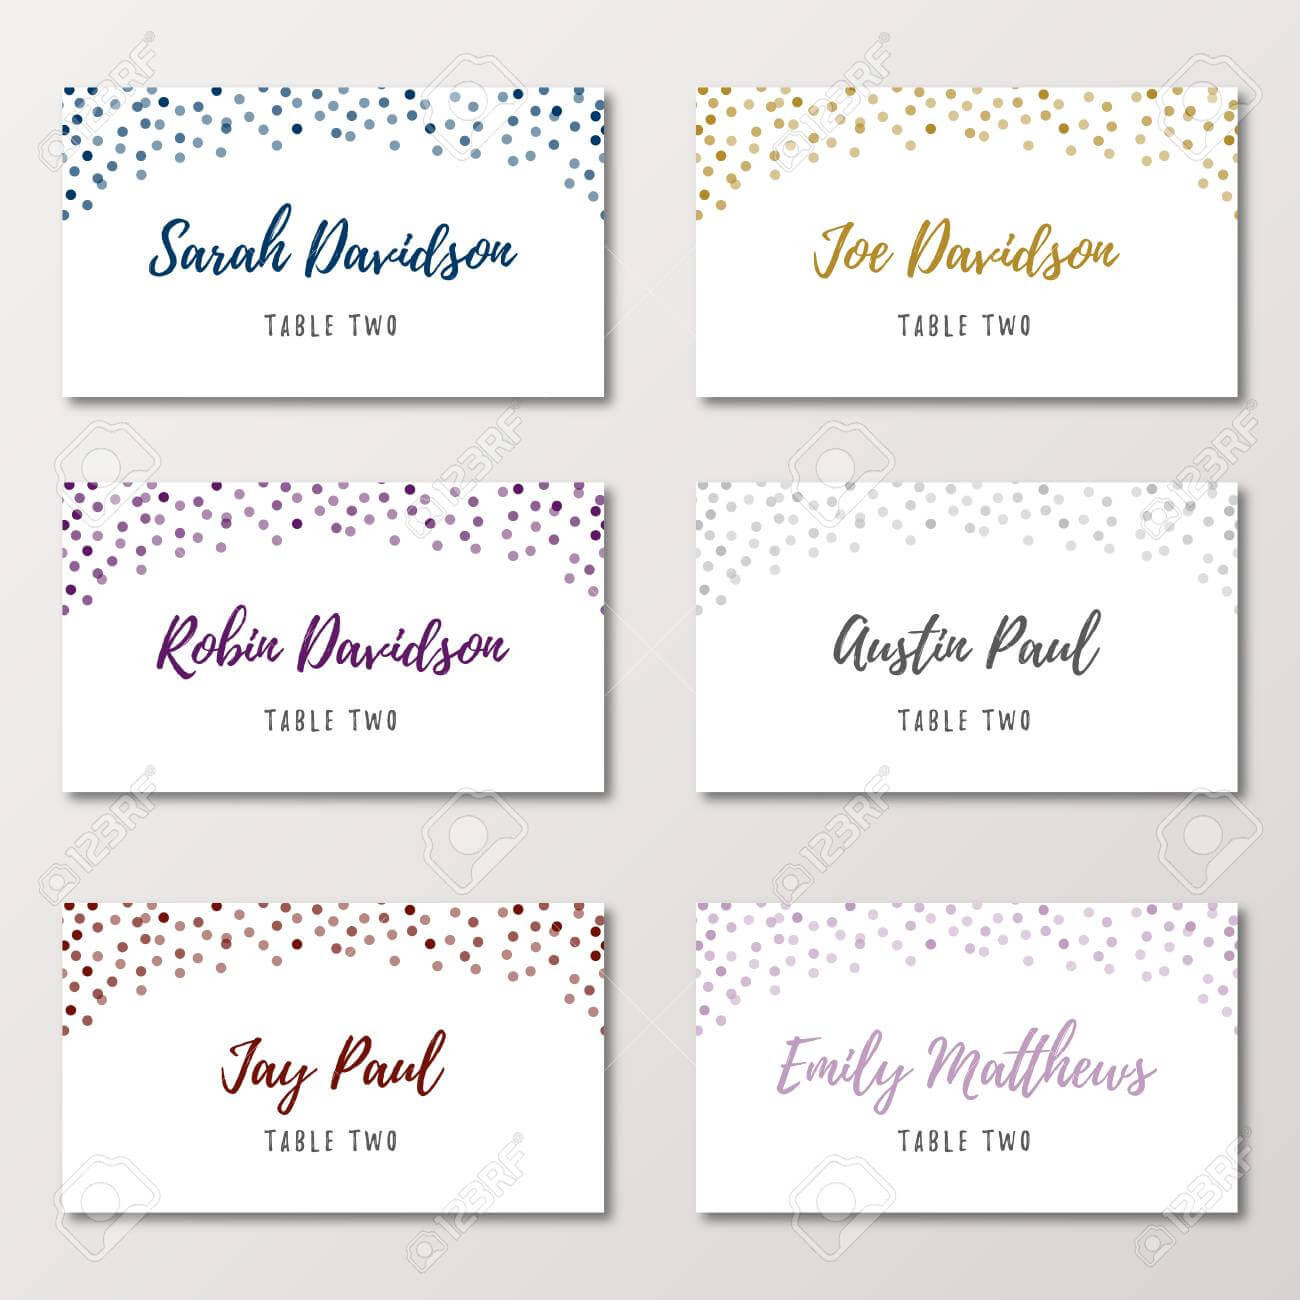 Template Place Cards - Papele.alimentacionsegura Intended For Place Card Setting Template